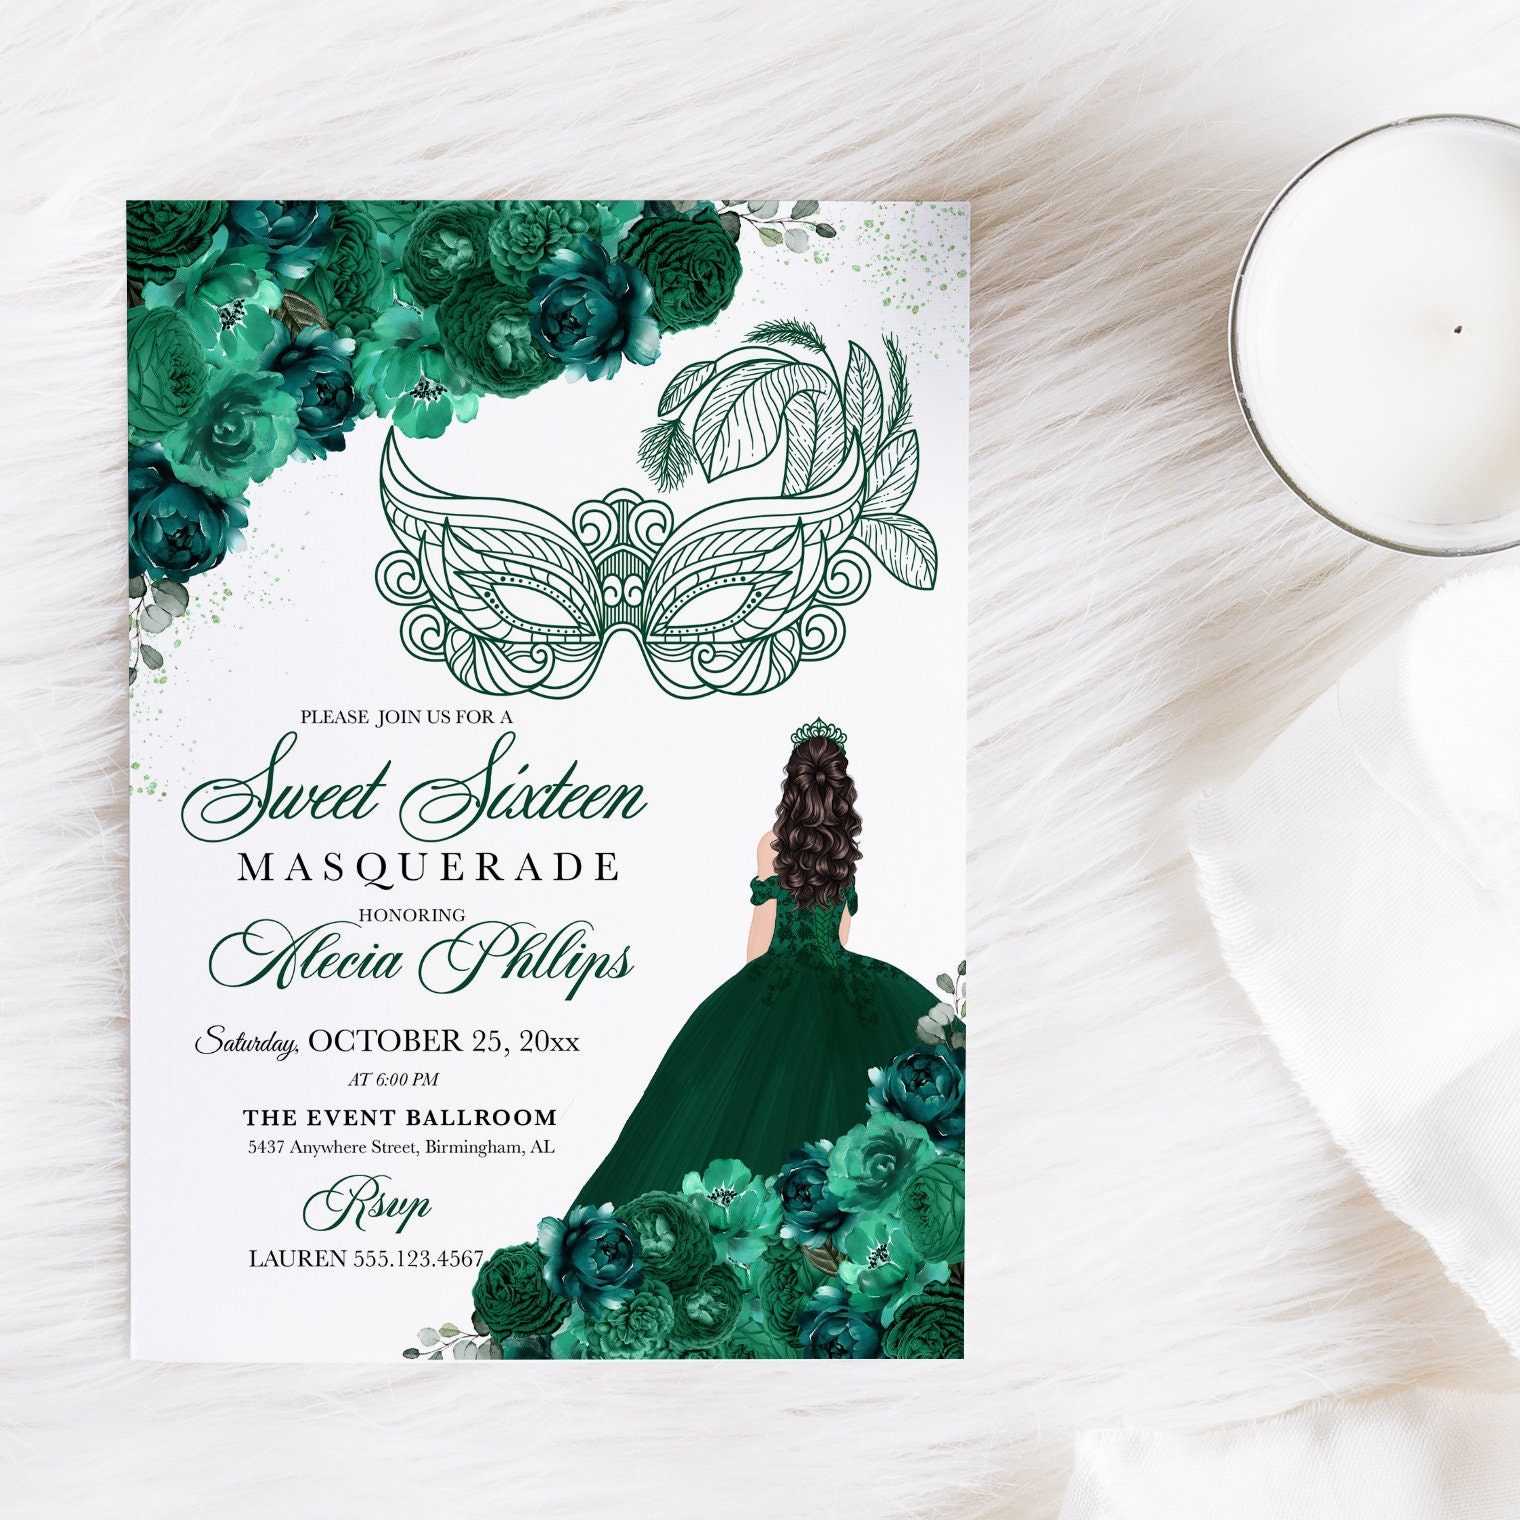 How to Make a Scroll Party Invitation • Crafting a Green World